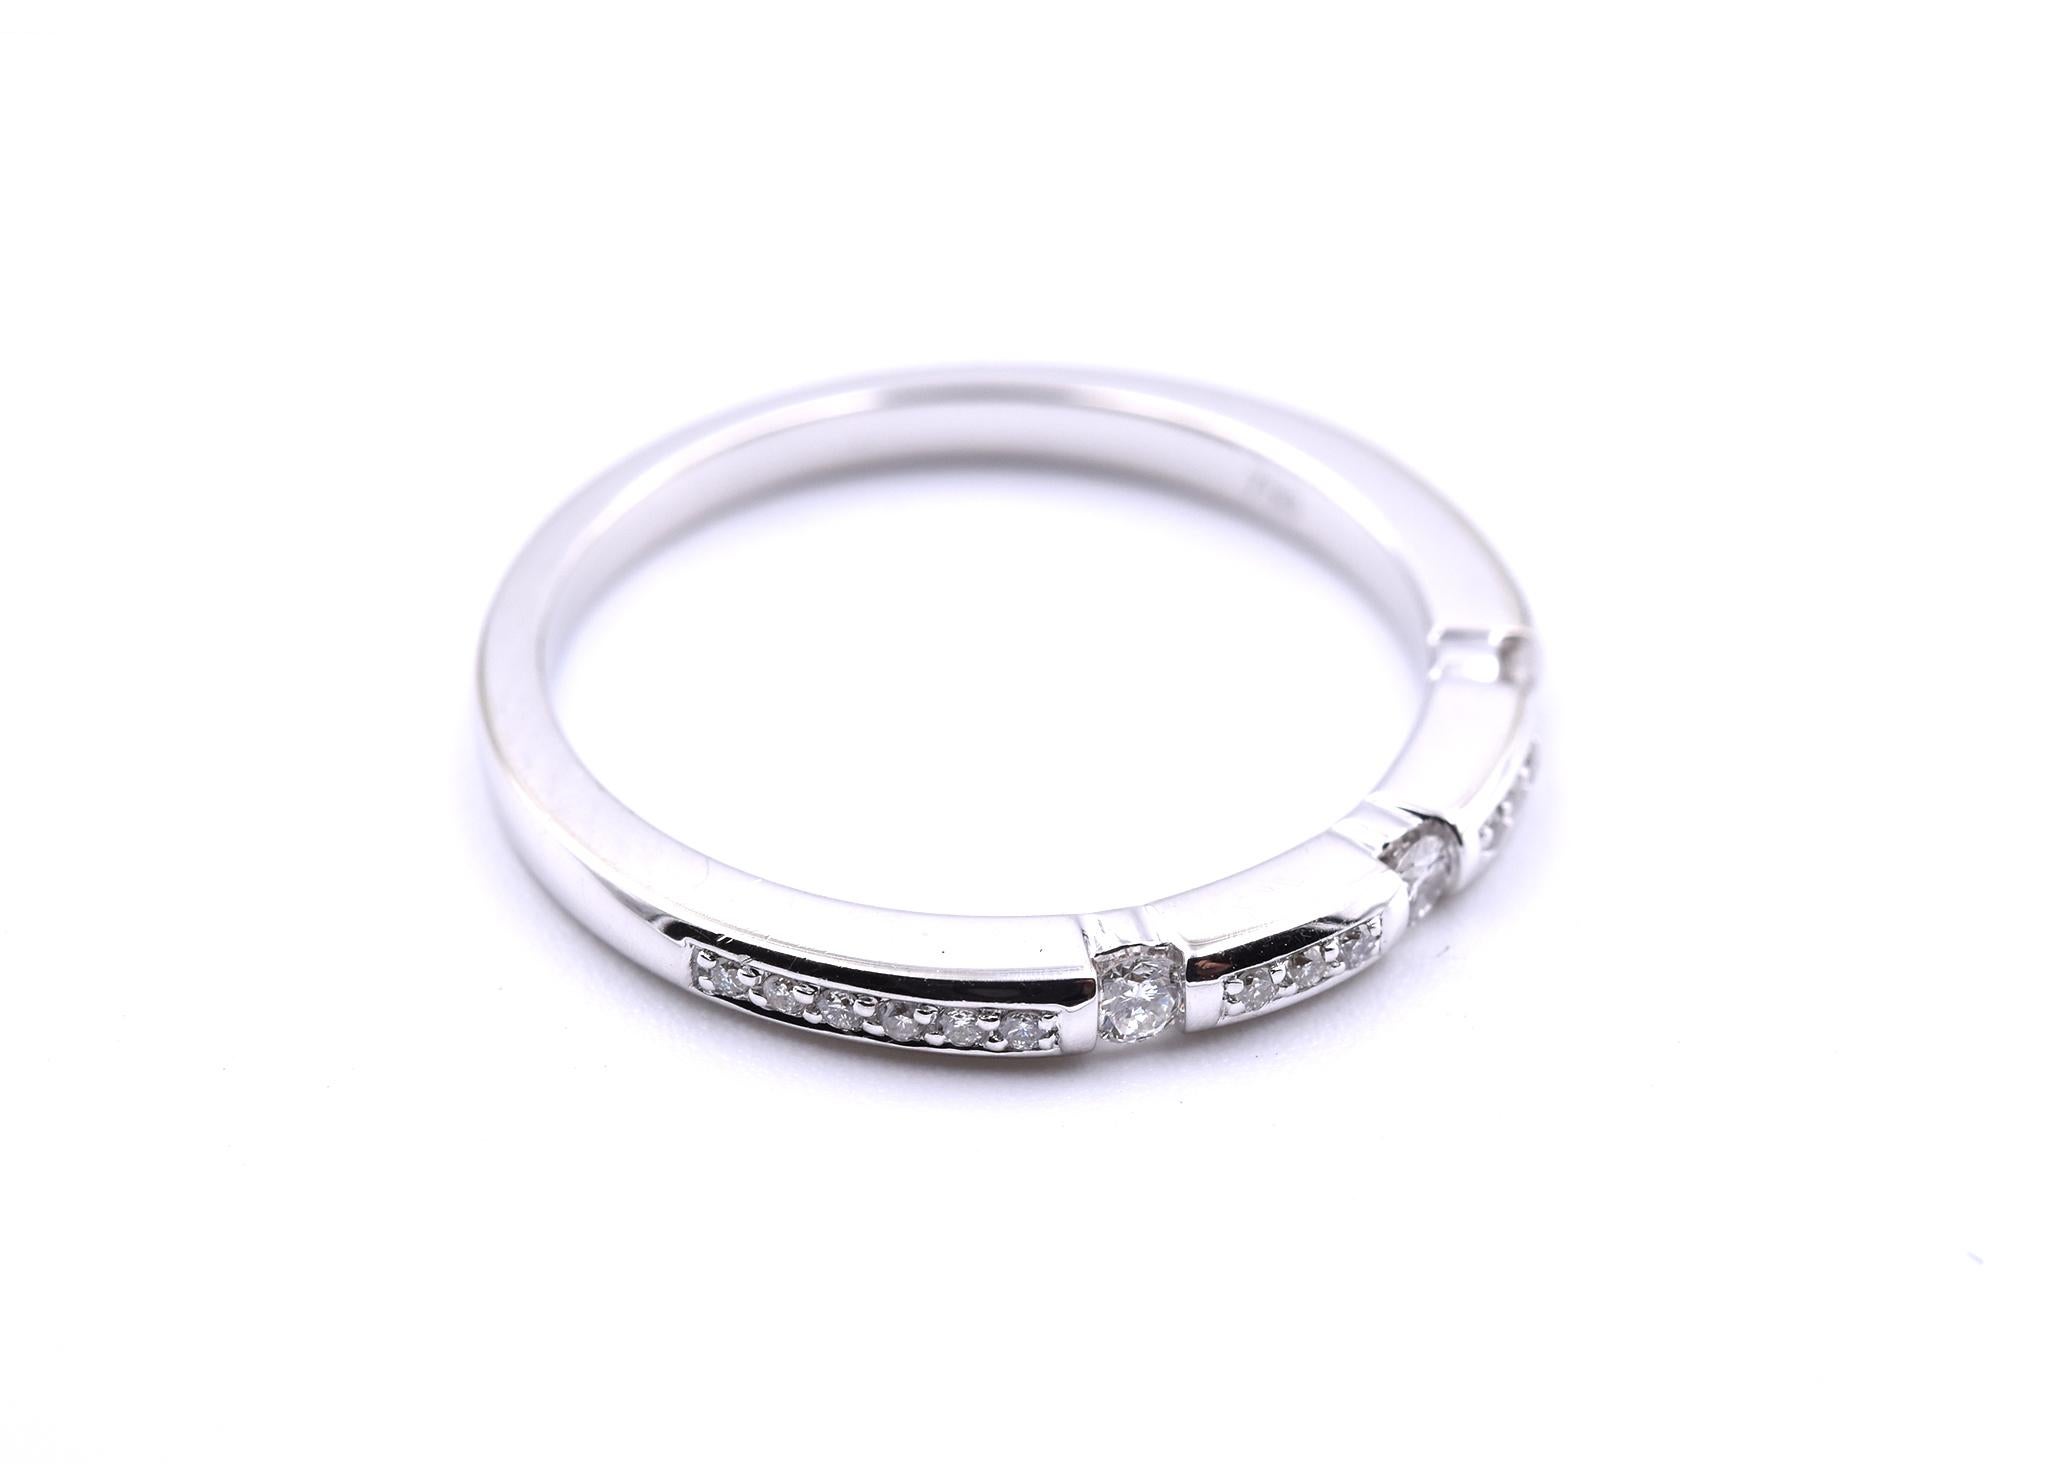 Designer: custom design
Material: 18k white gold
Diamonds: 21 round brilliant cut diamonds = 0.25
Color: H
Clarity: SI1
Dimensions: band is 2mm wide
Ring size: 7 (please allow two additional shipping days for sizing requests)
Weight: 3.1 grams
